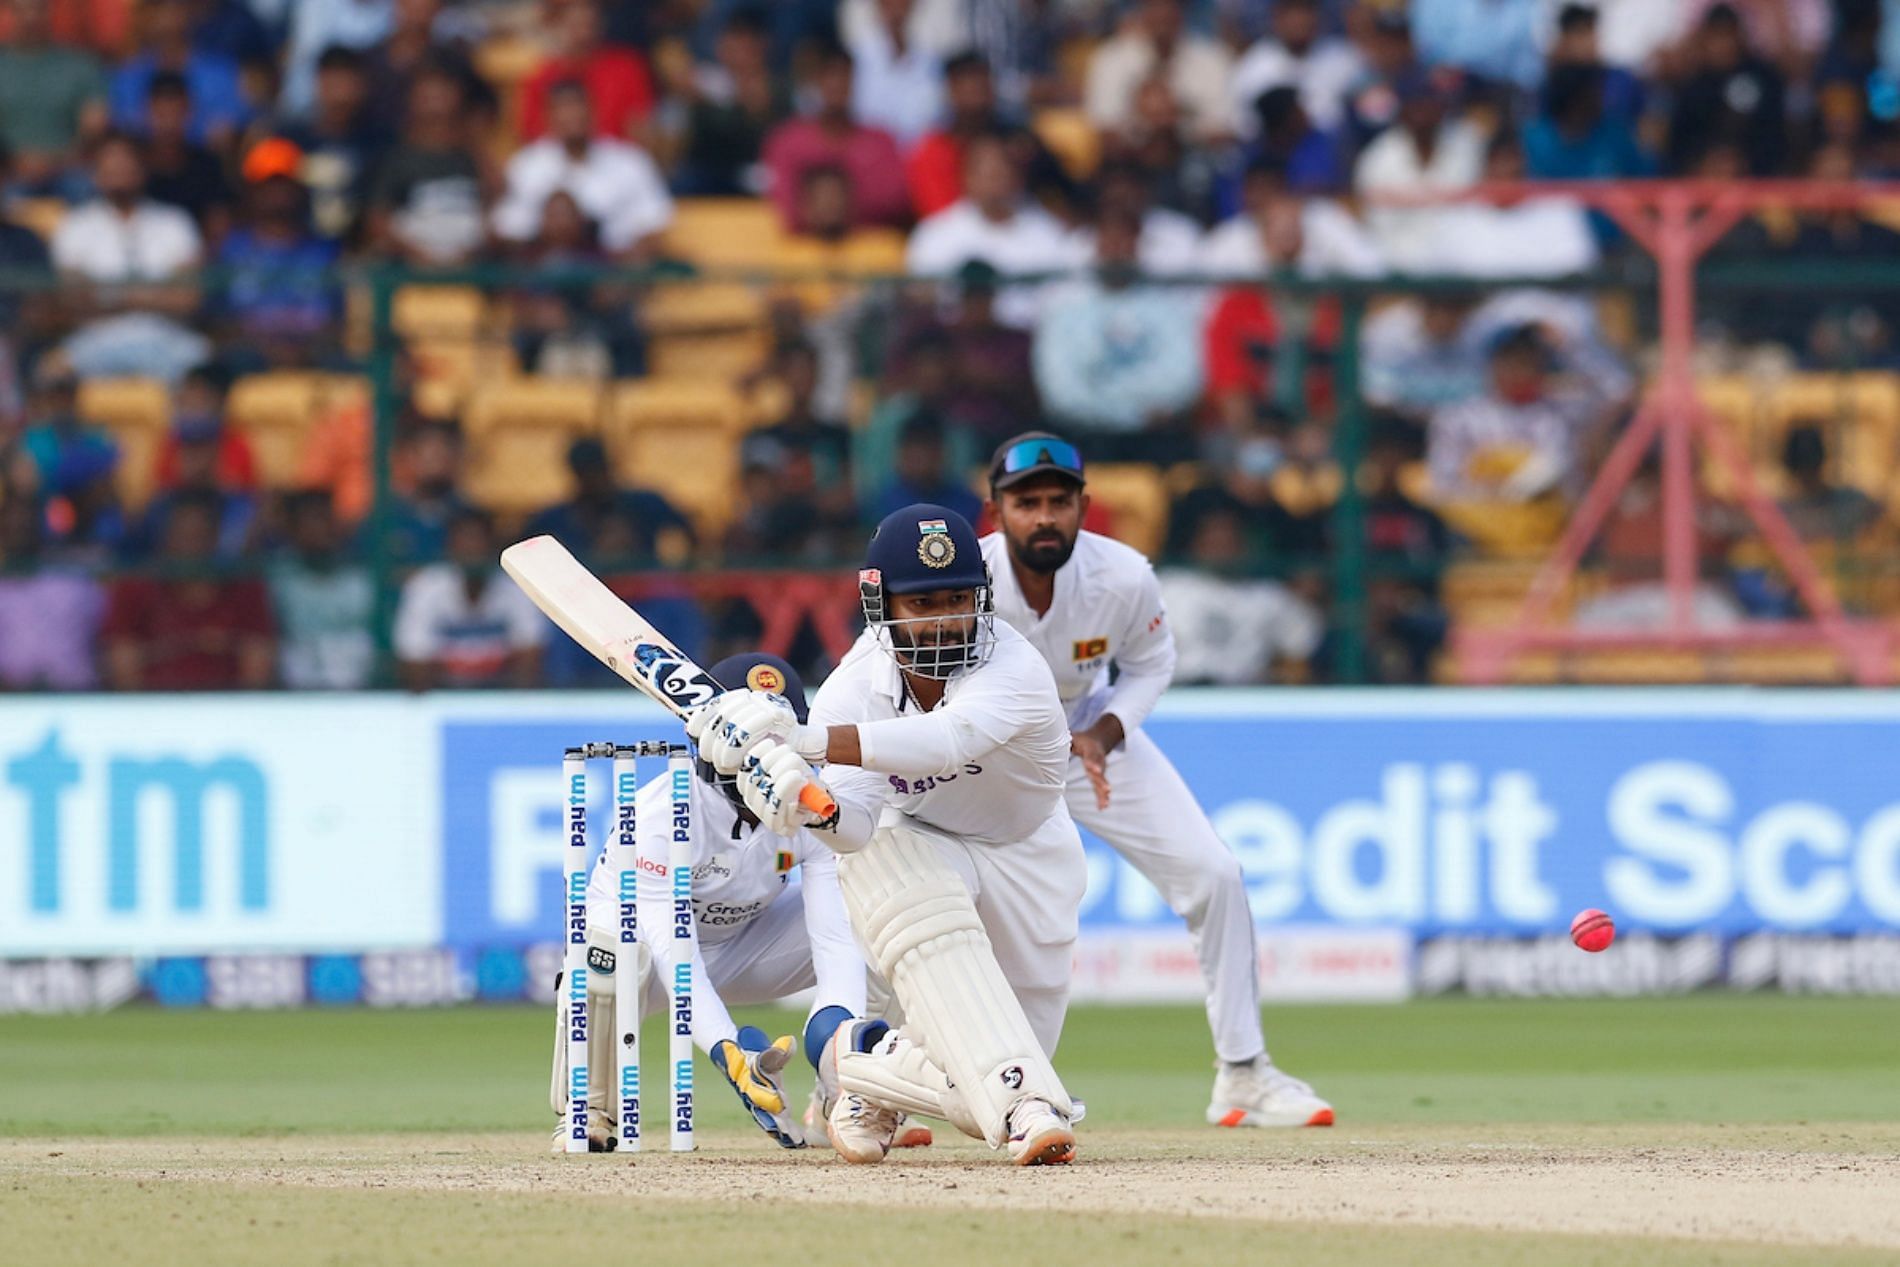 Rishabh Pant scored a record-breaking fifty. Pic: BCCI